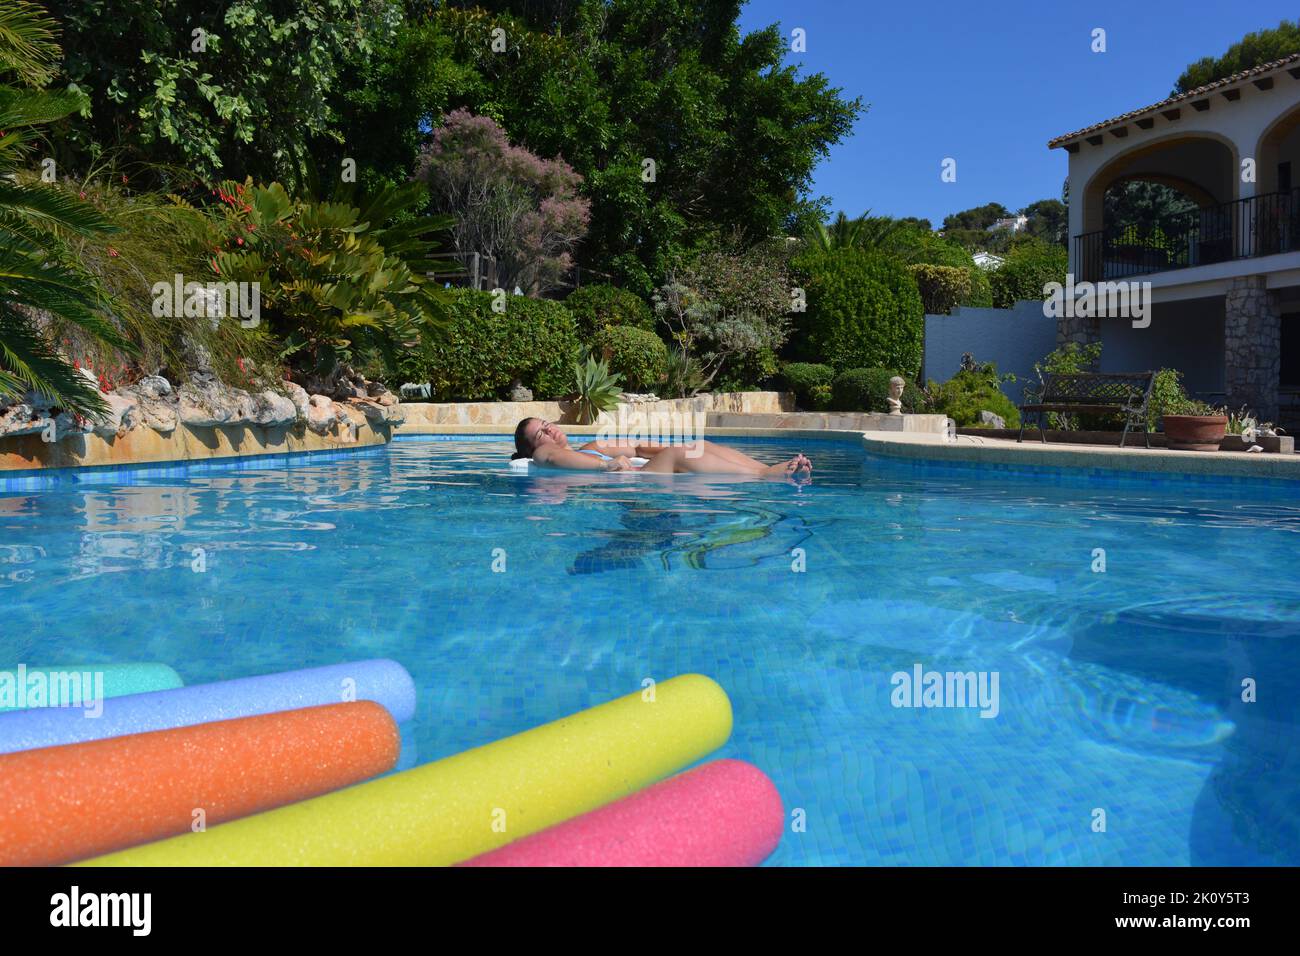 Young woman sunbathing and keeping cool, floating in swimming pool in a Mediterranean garden Stock Photo